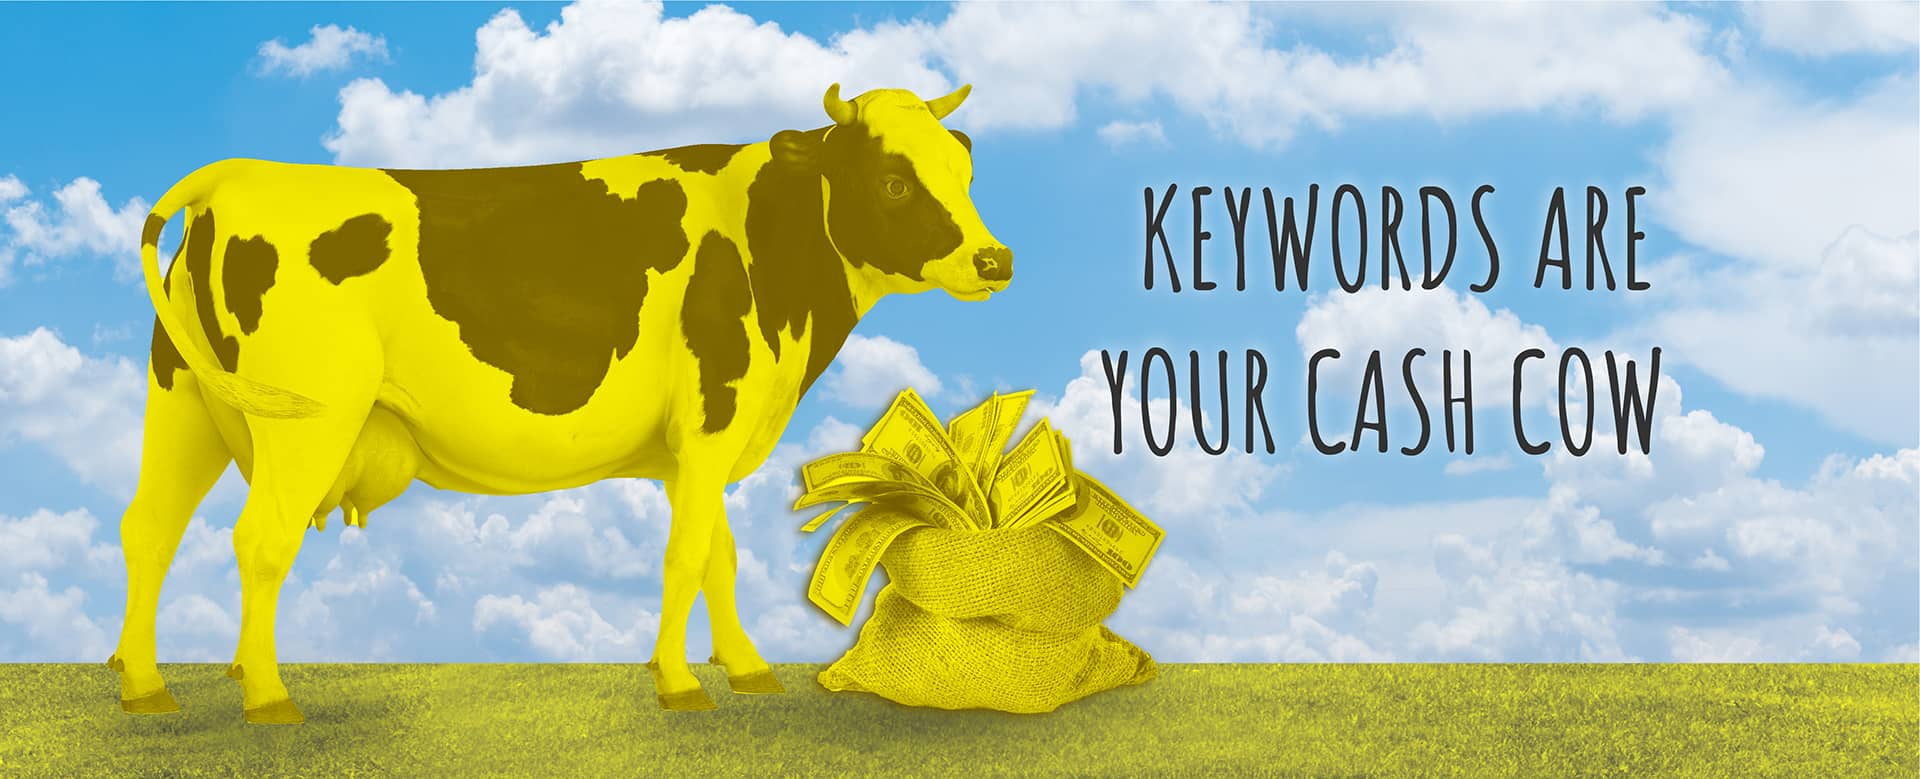 Keywords Are Your Cash Cow